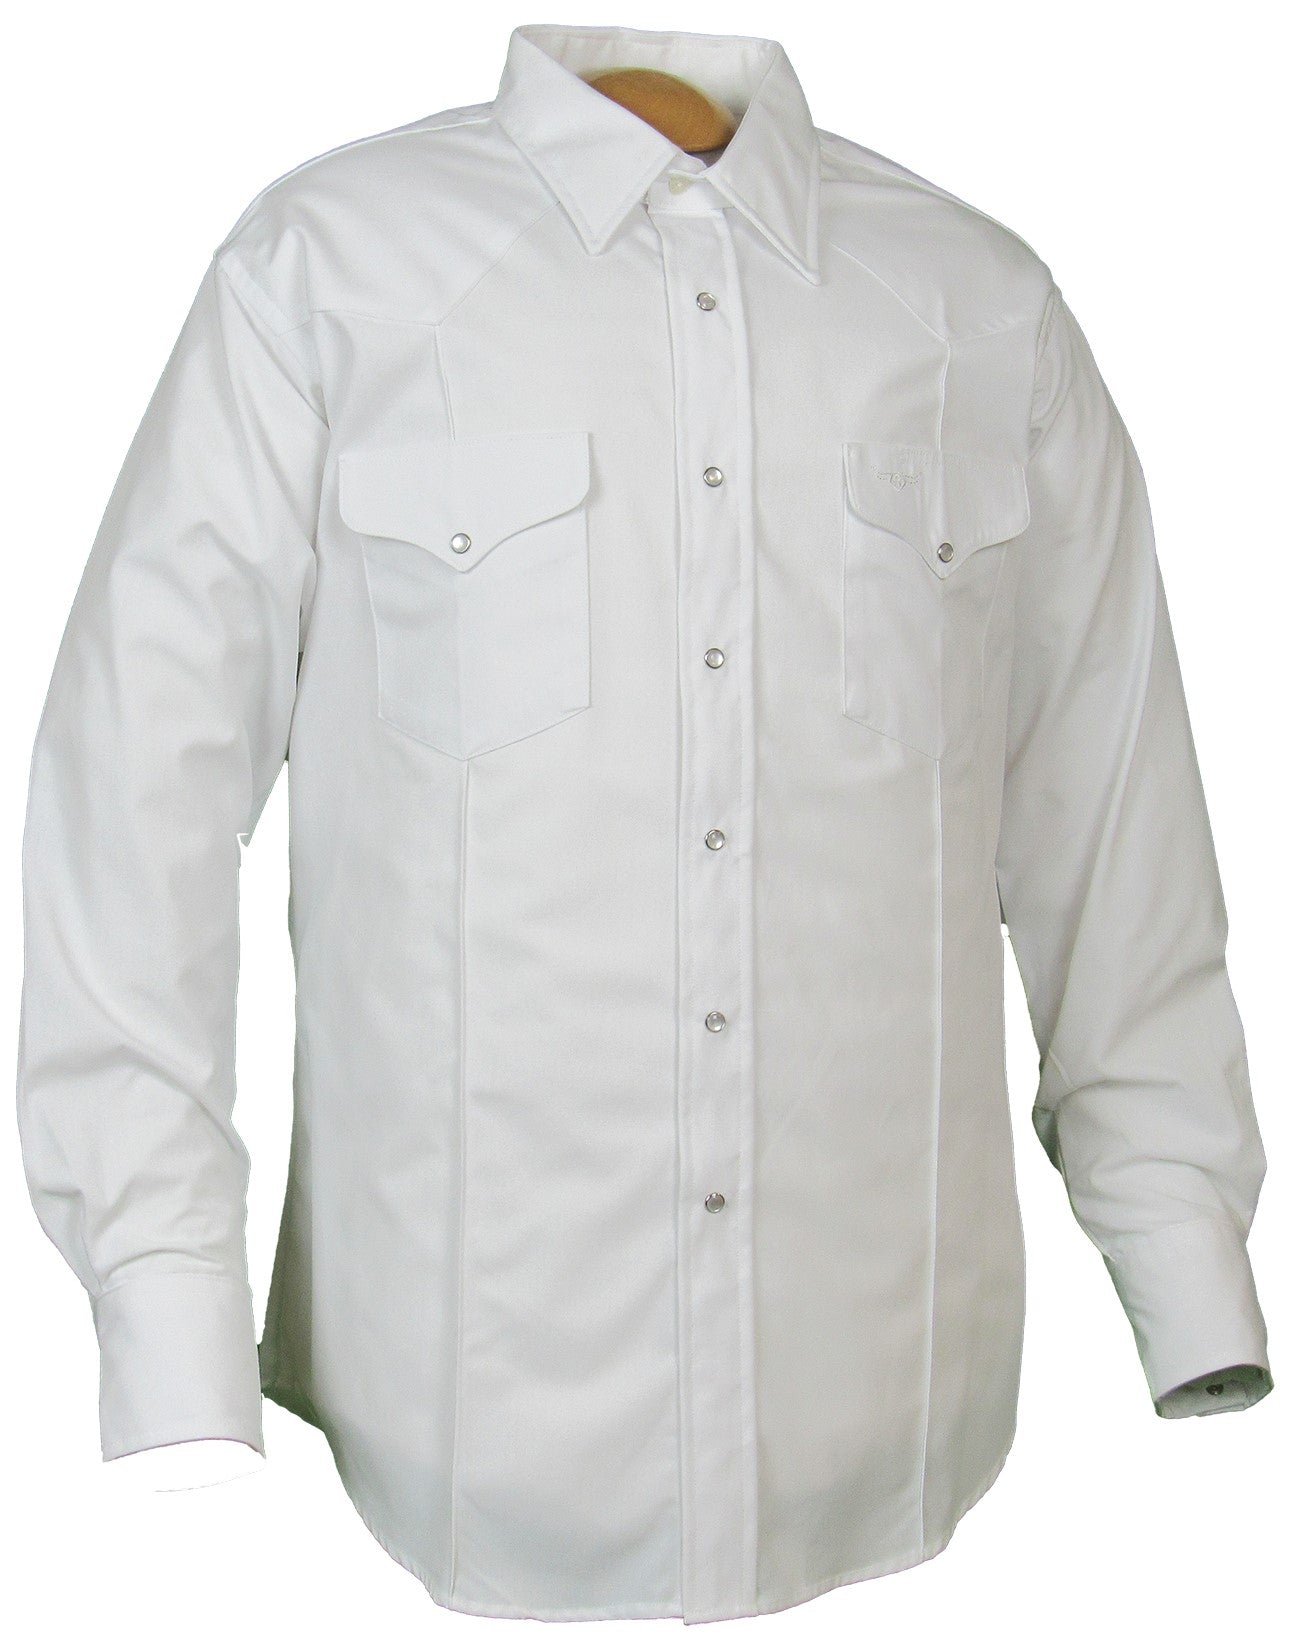 Flying R Ranchwear Rancher Crease shirt in Solid White Made in USA with snaps